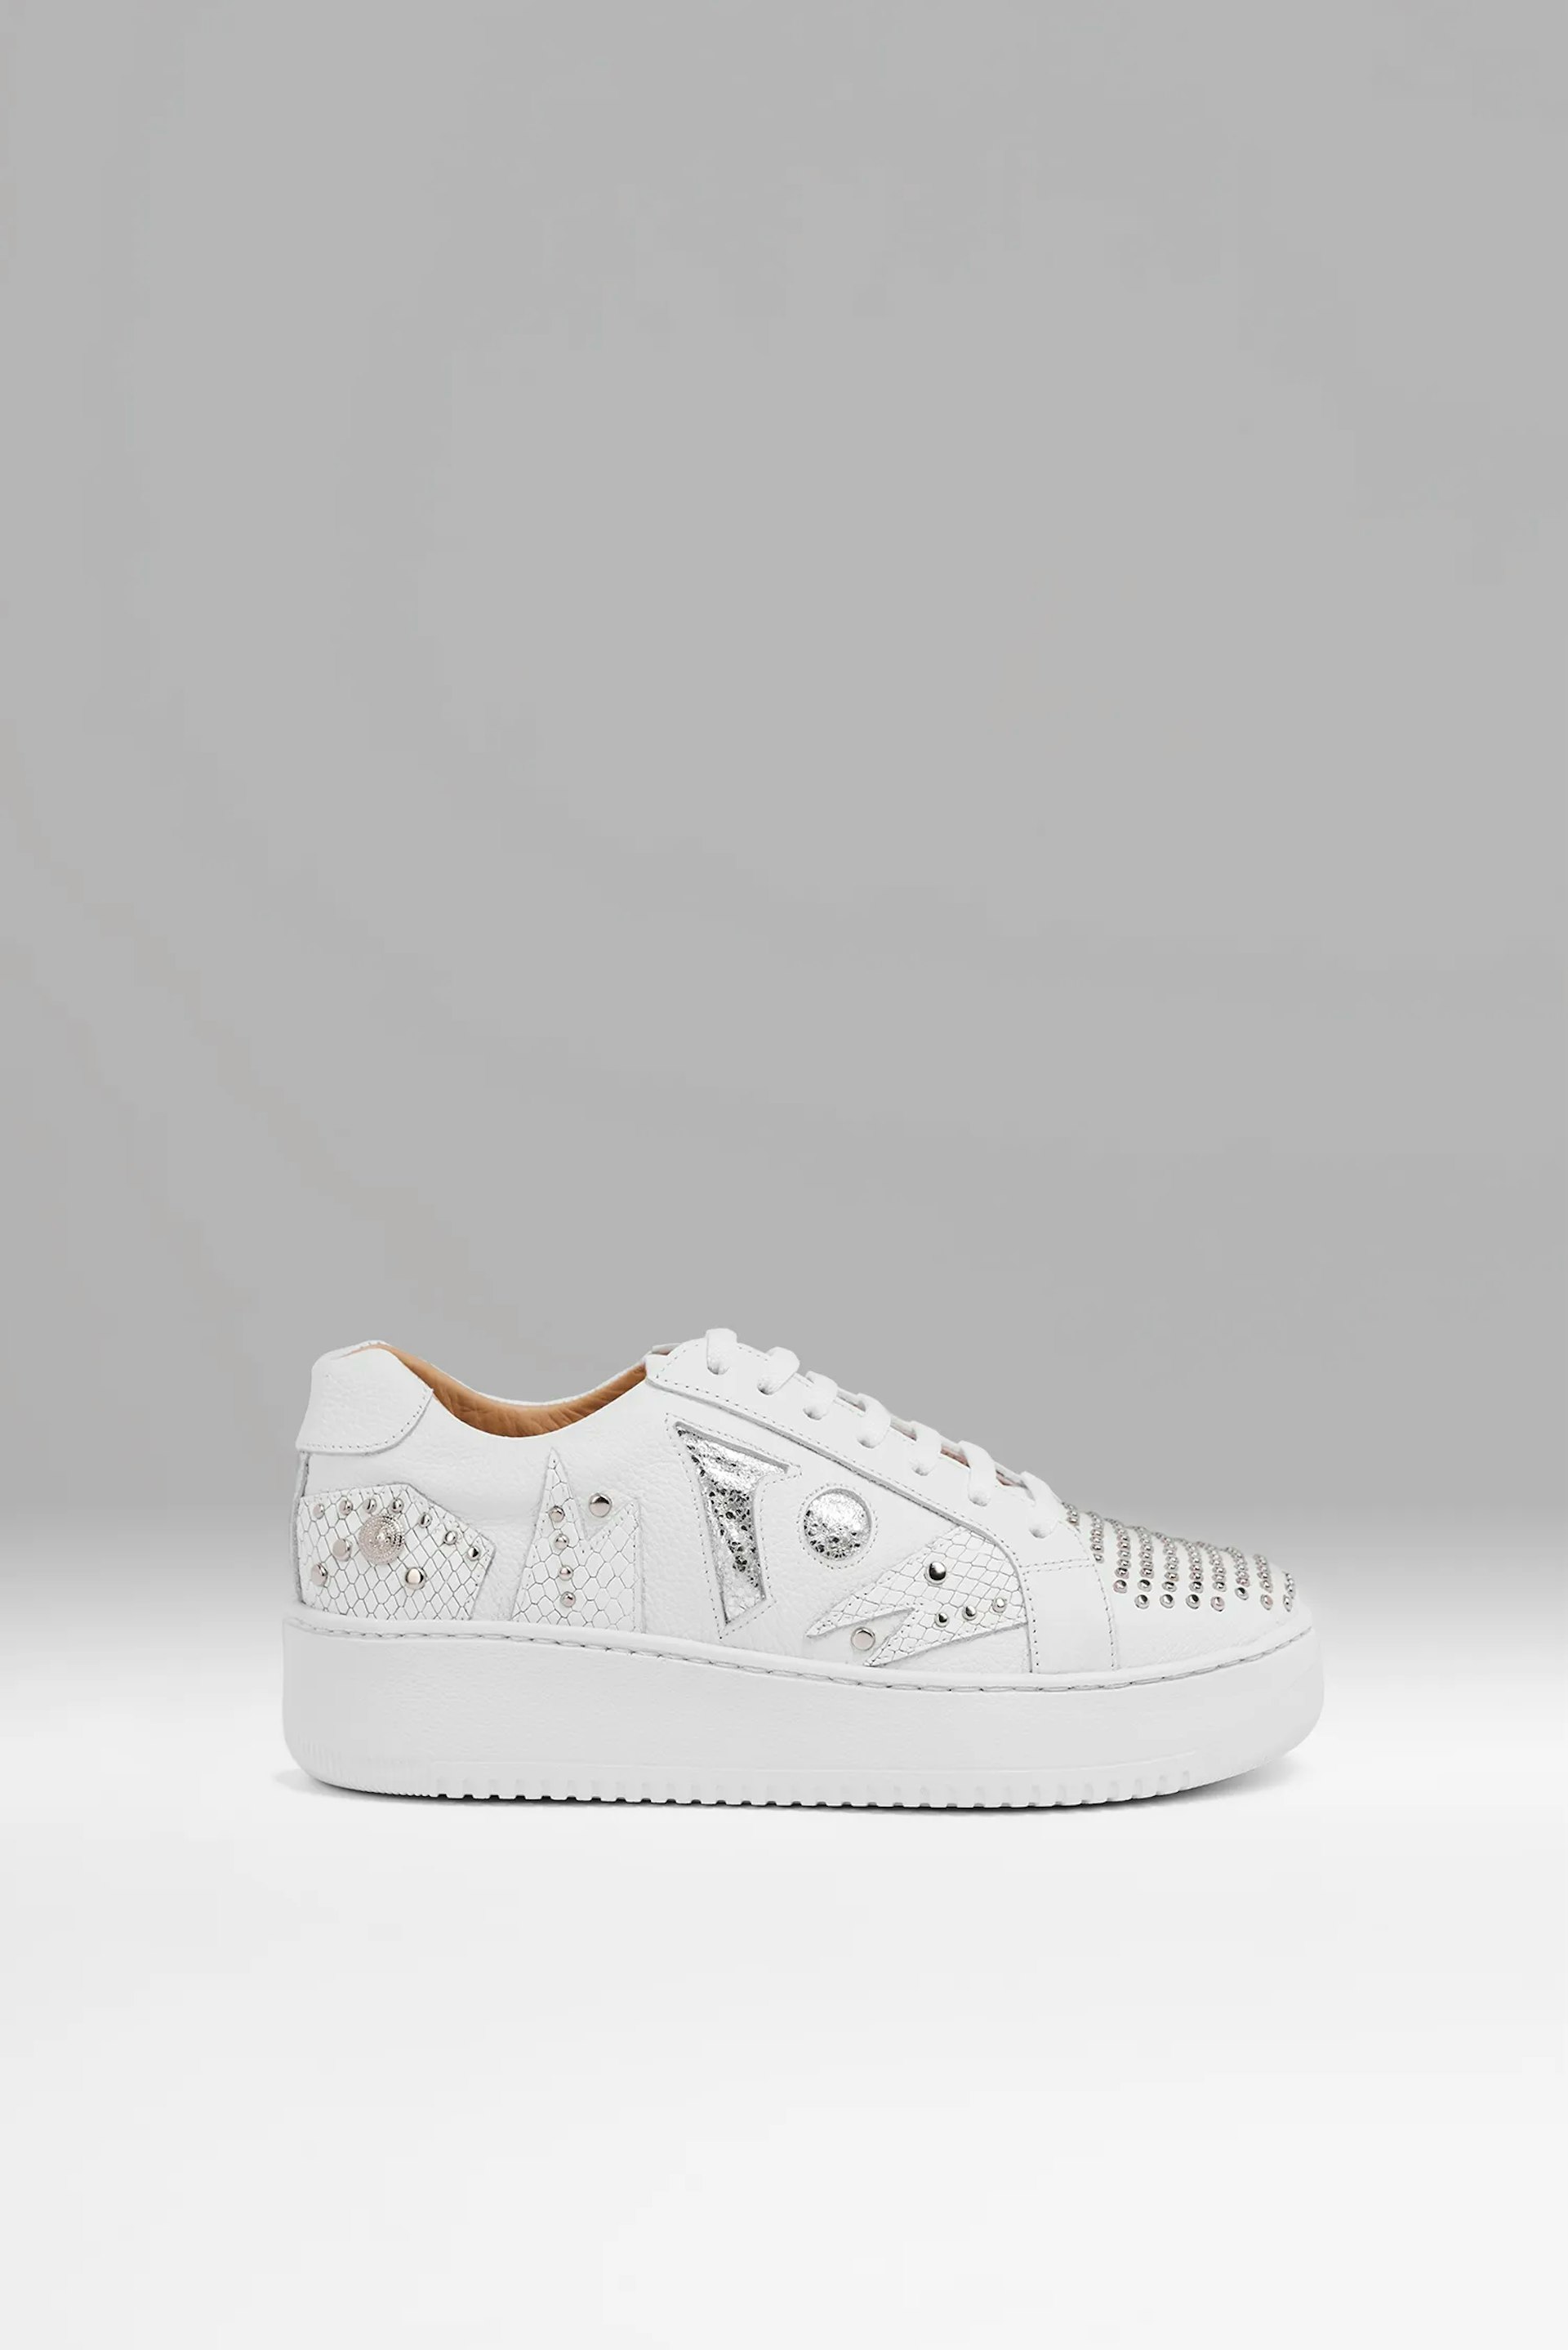 Sneakers Vitti Mallorca. Low-top sneaker crafted in flawless white leather. Textured details enrich its surface, offering a tLow-top sneaker crafted in flawless white leather. Textured details enrich its surface, offering a t...